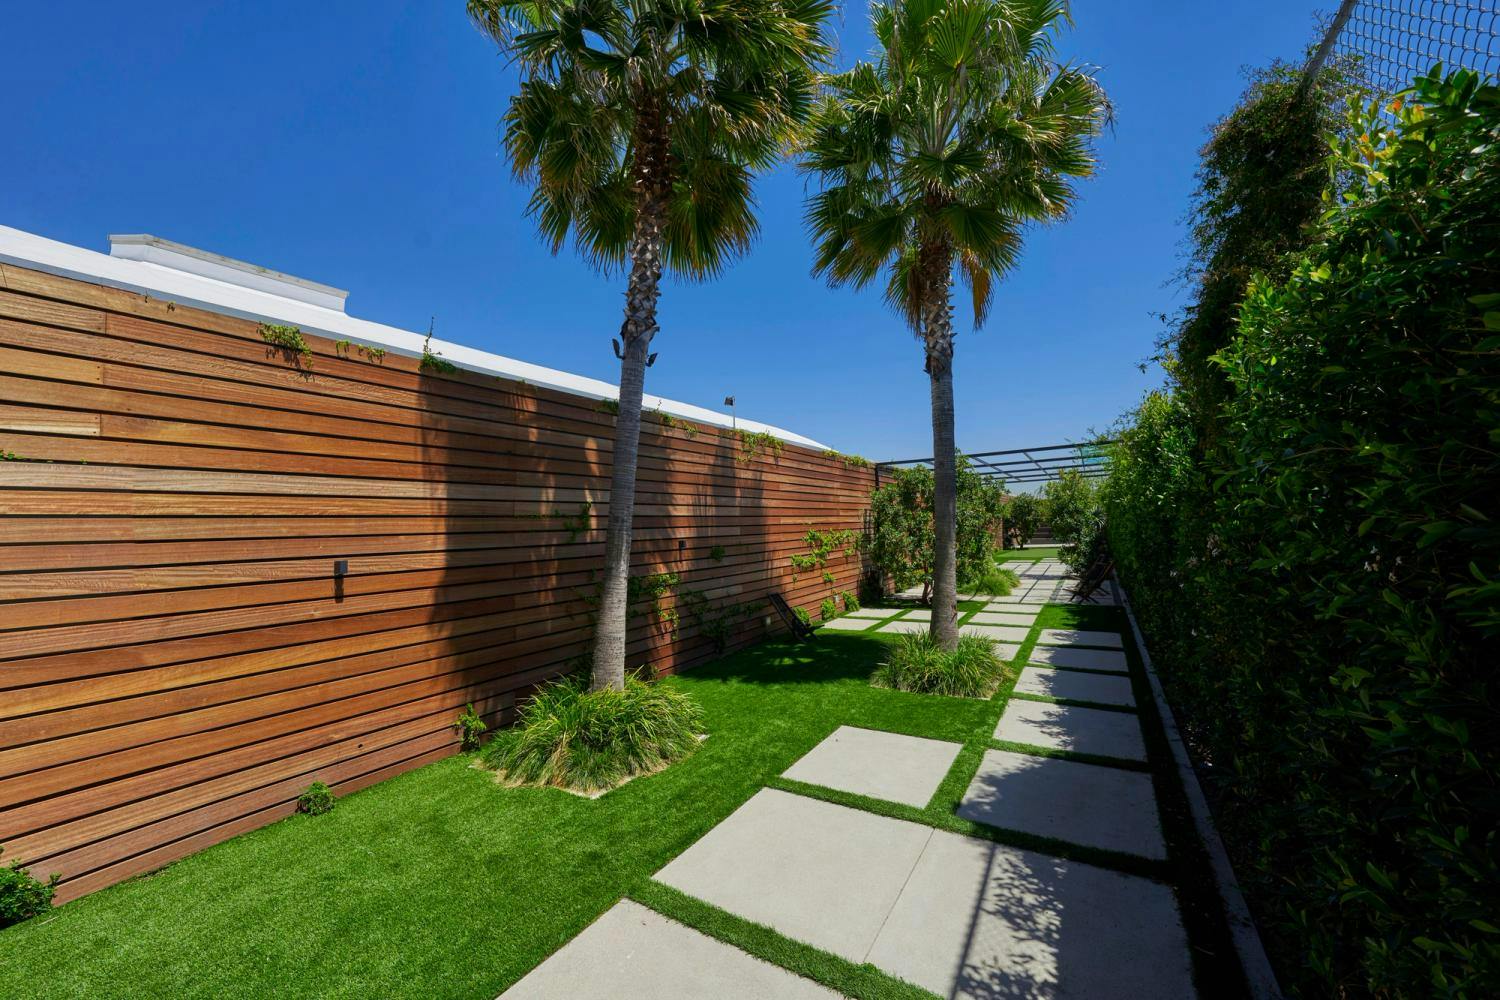 A serene garden pathway flanked by wooden fences and tall palm trees under a clear blue sky.